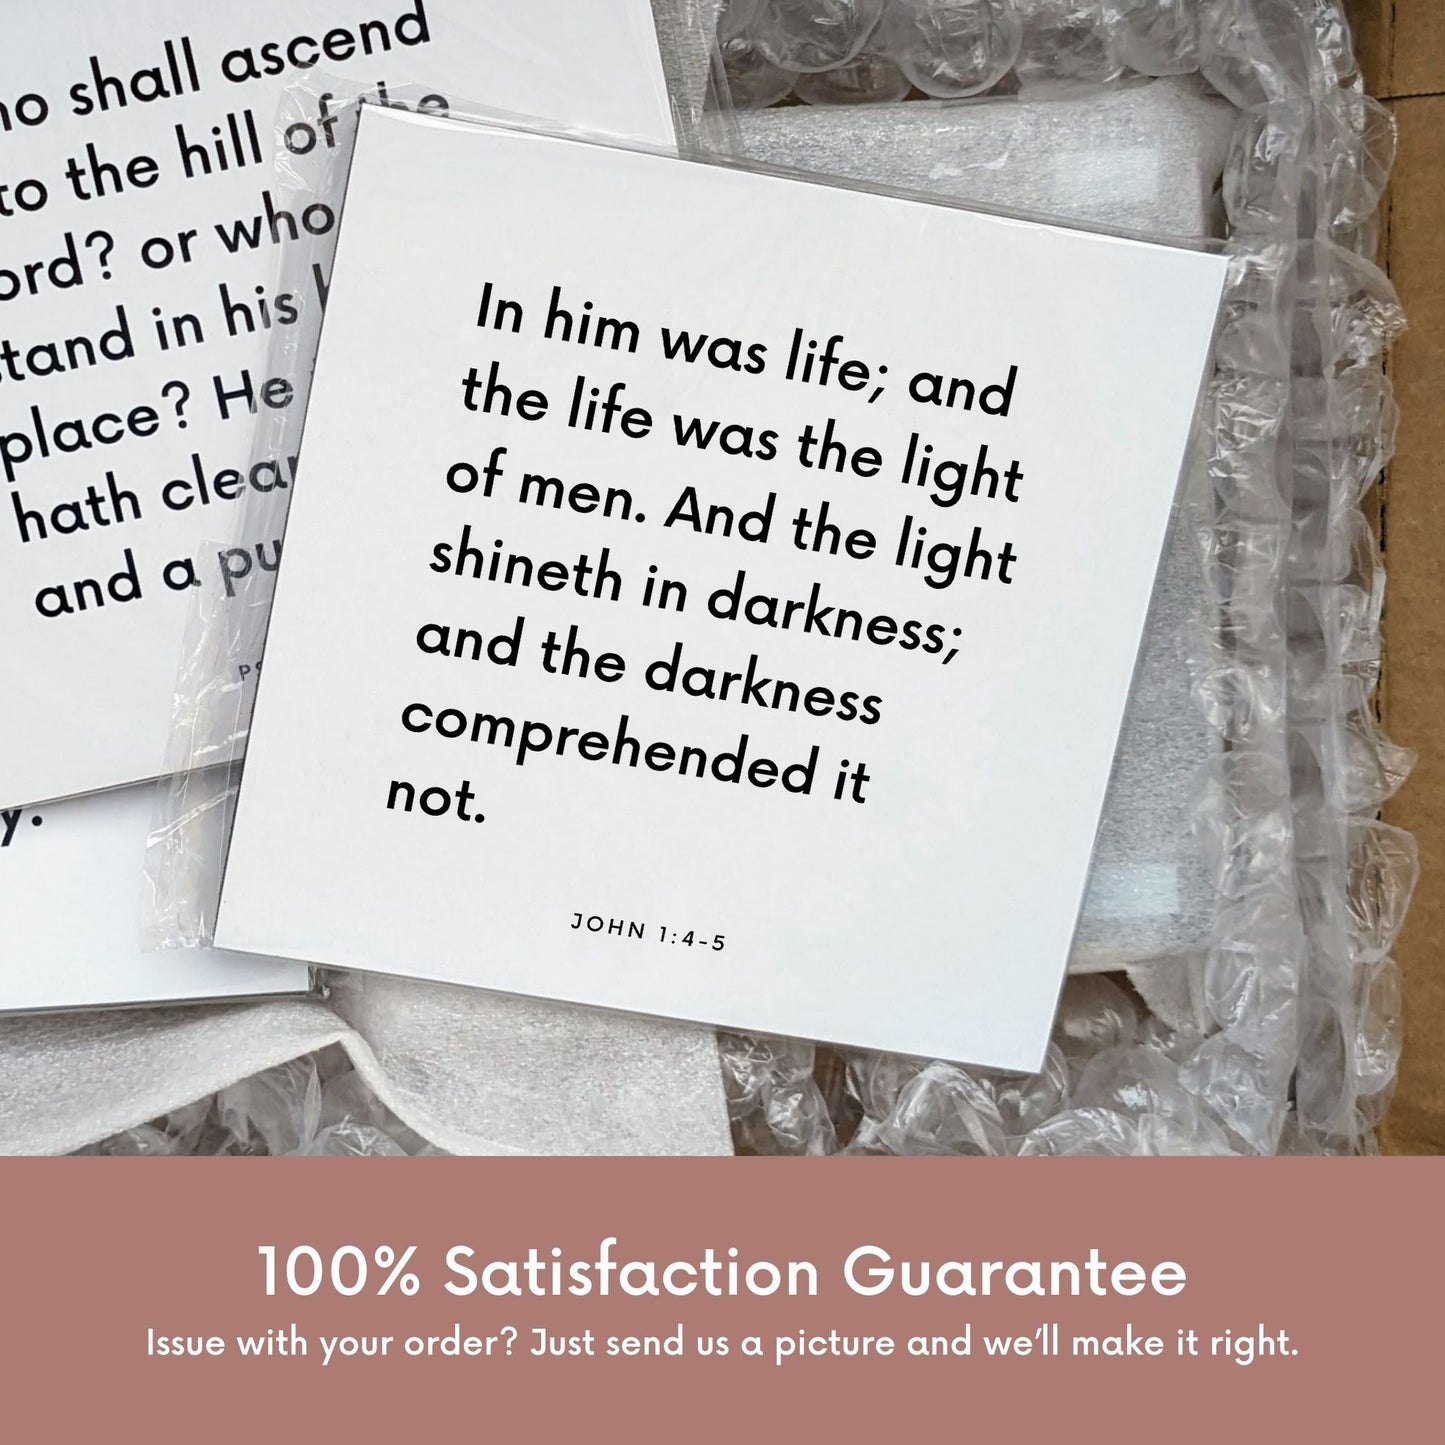 Shipping materials for scripture tile of John 1:4-5 - "In him was life; and the life was the light of men"